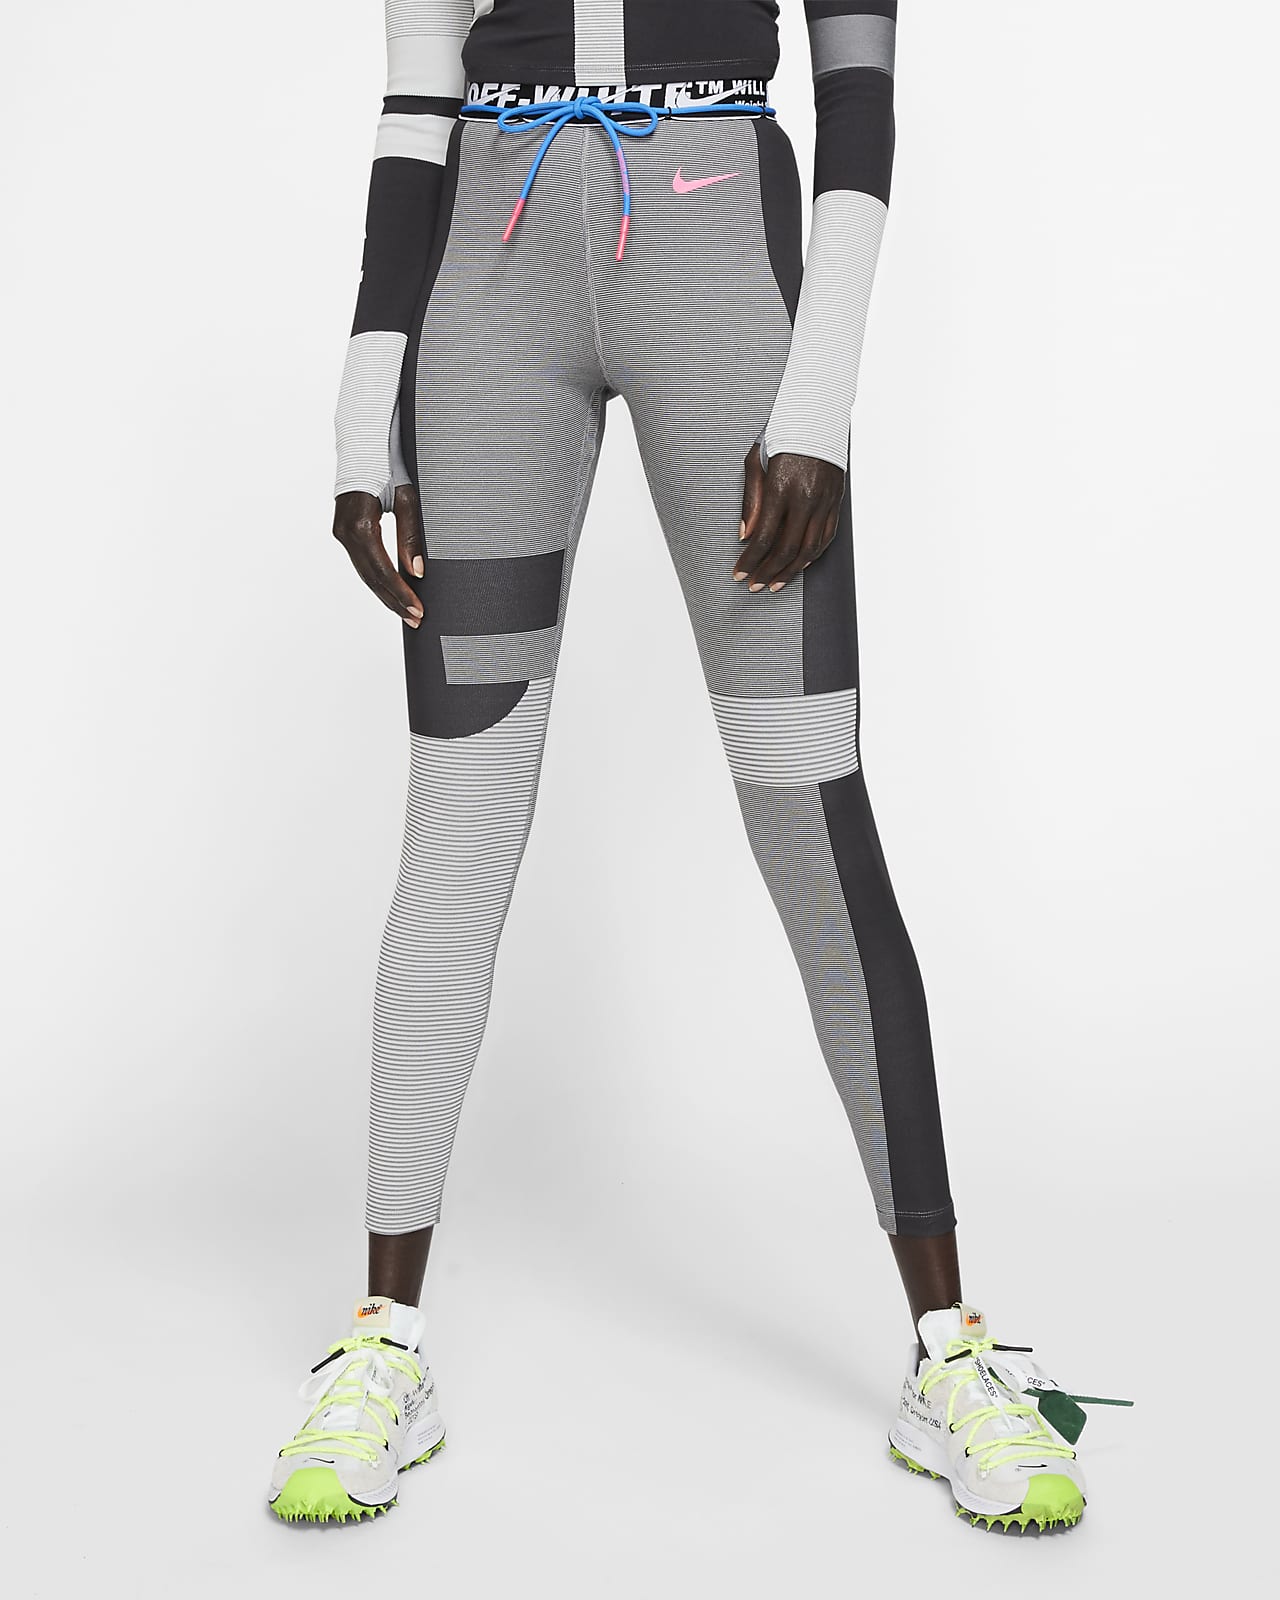 https://static.nike.com/a/images/t_PDP_1280_v1/f_auto,q_auto:eco/xglzazh2ylxd3olhgn0n/off-white%E2%84%A2-womens-high-waisted-7-8-running-leggings-HHm6wd.png